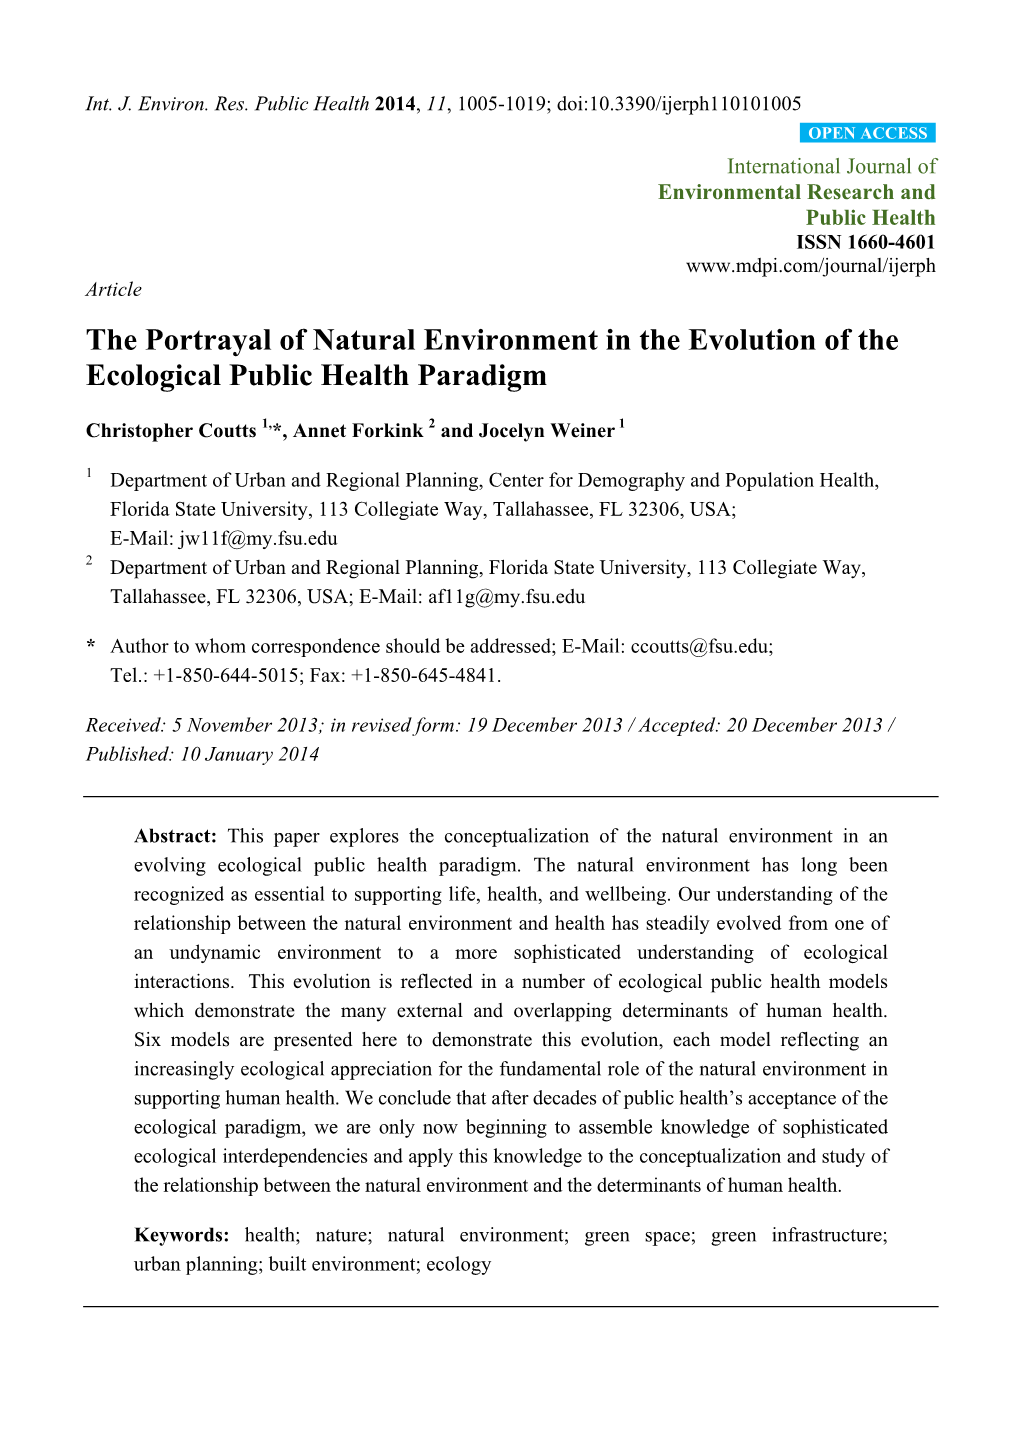 The Portrayal of Natural Environment in the Evolution of the Ecological Public Health Paradigm